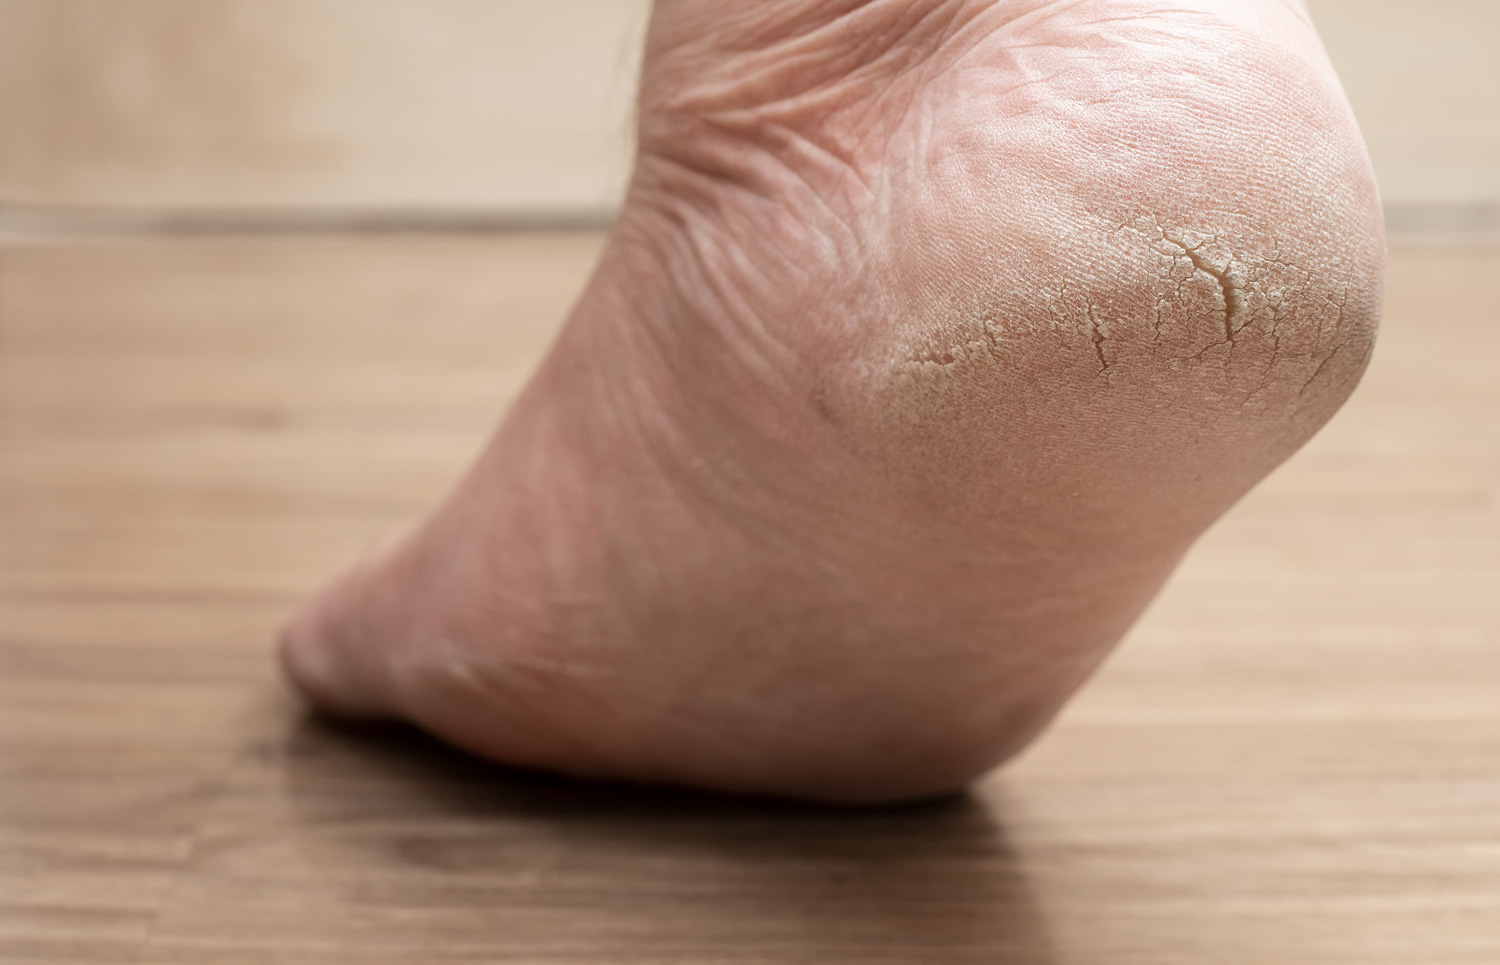 Cracked Heels: Treatment And Ayurvedic Home Remedies